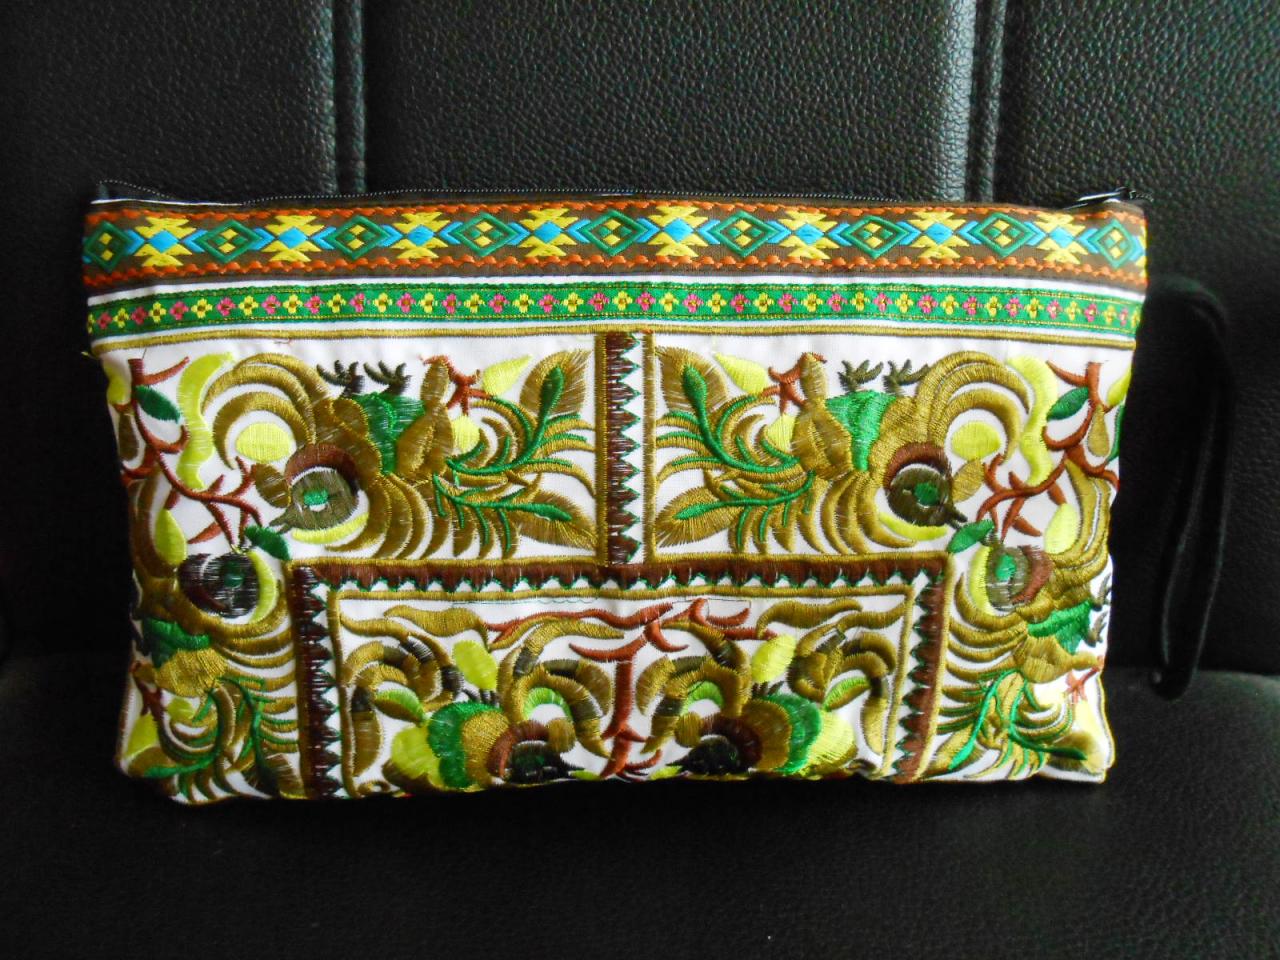 Green Clutch Wristlet Bag Embroidery W/ White Fabric Chinese Hmong Hilltribe Thailand (kp1057-grwh)